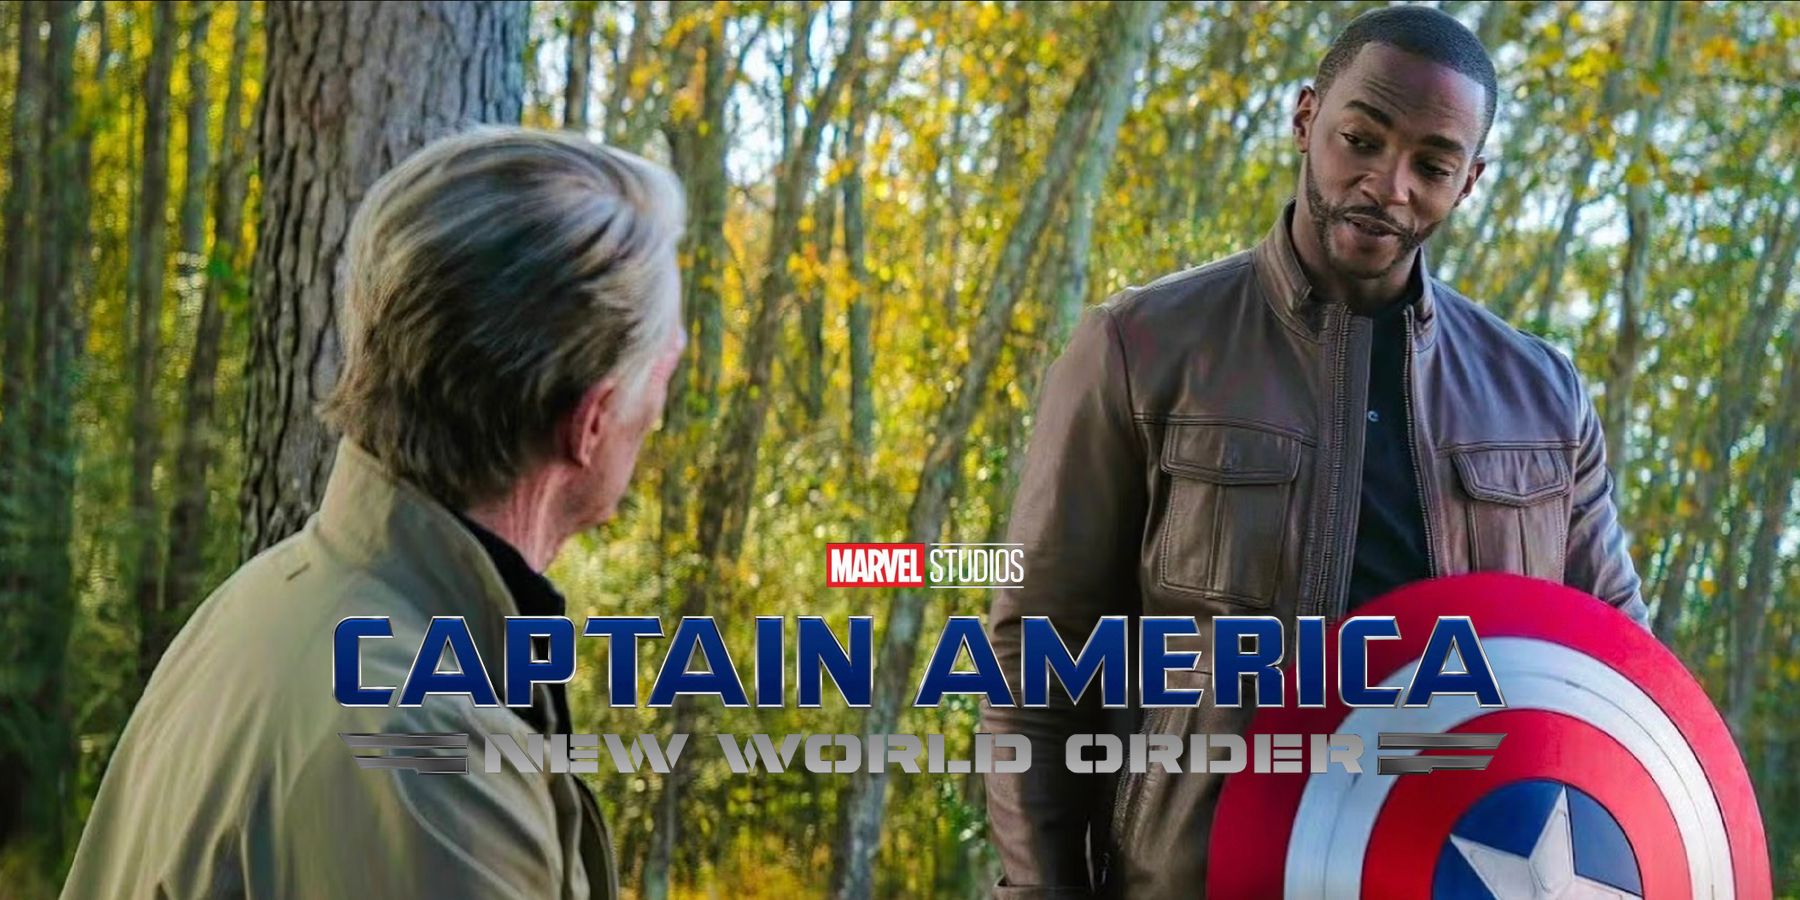 Captain America New World Order Title Meaning